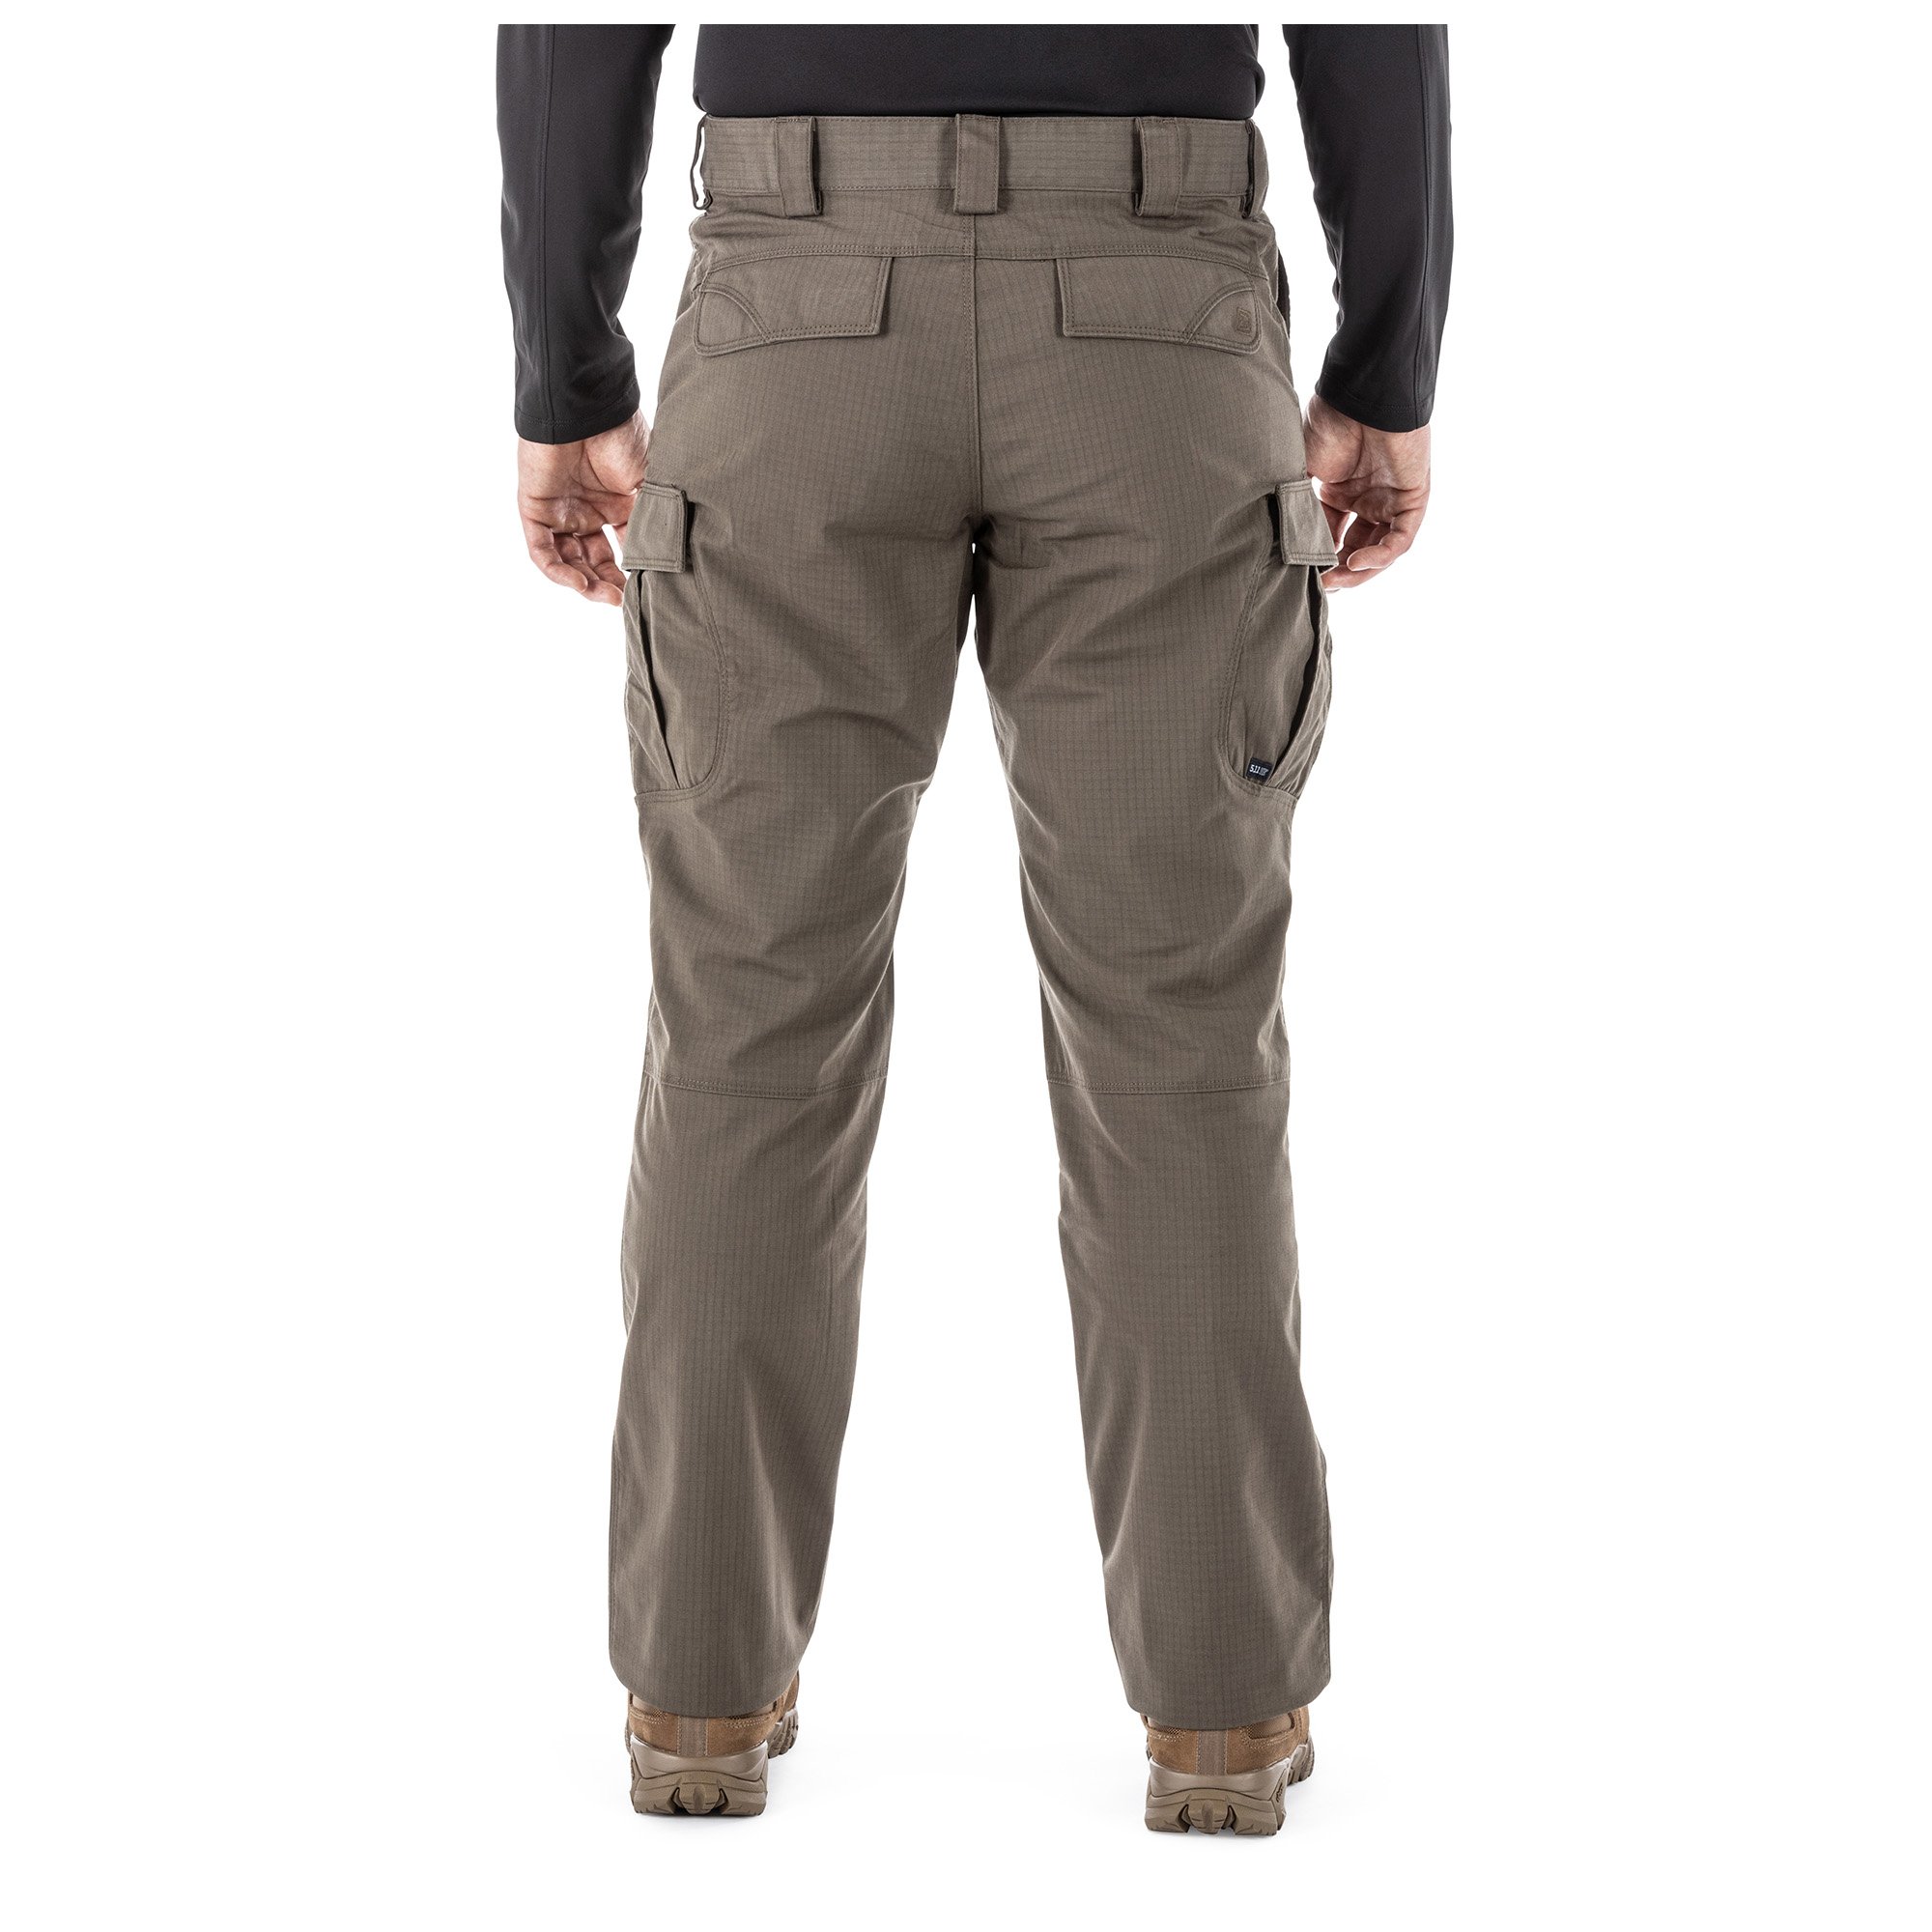 5.11 Work Gear Men's Stryke Pants, Adjustable Waistband, Stretchable Flex-Tac Fabric, Storm, 40W x 32L, Style 74369 - image 3 of 7